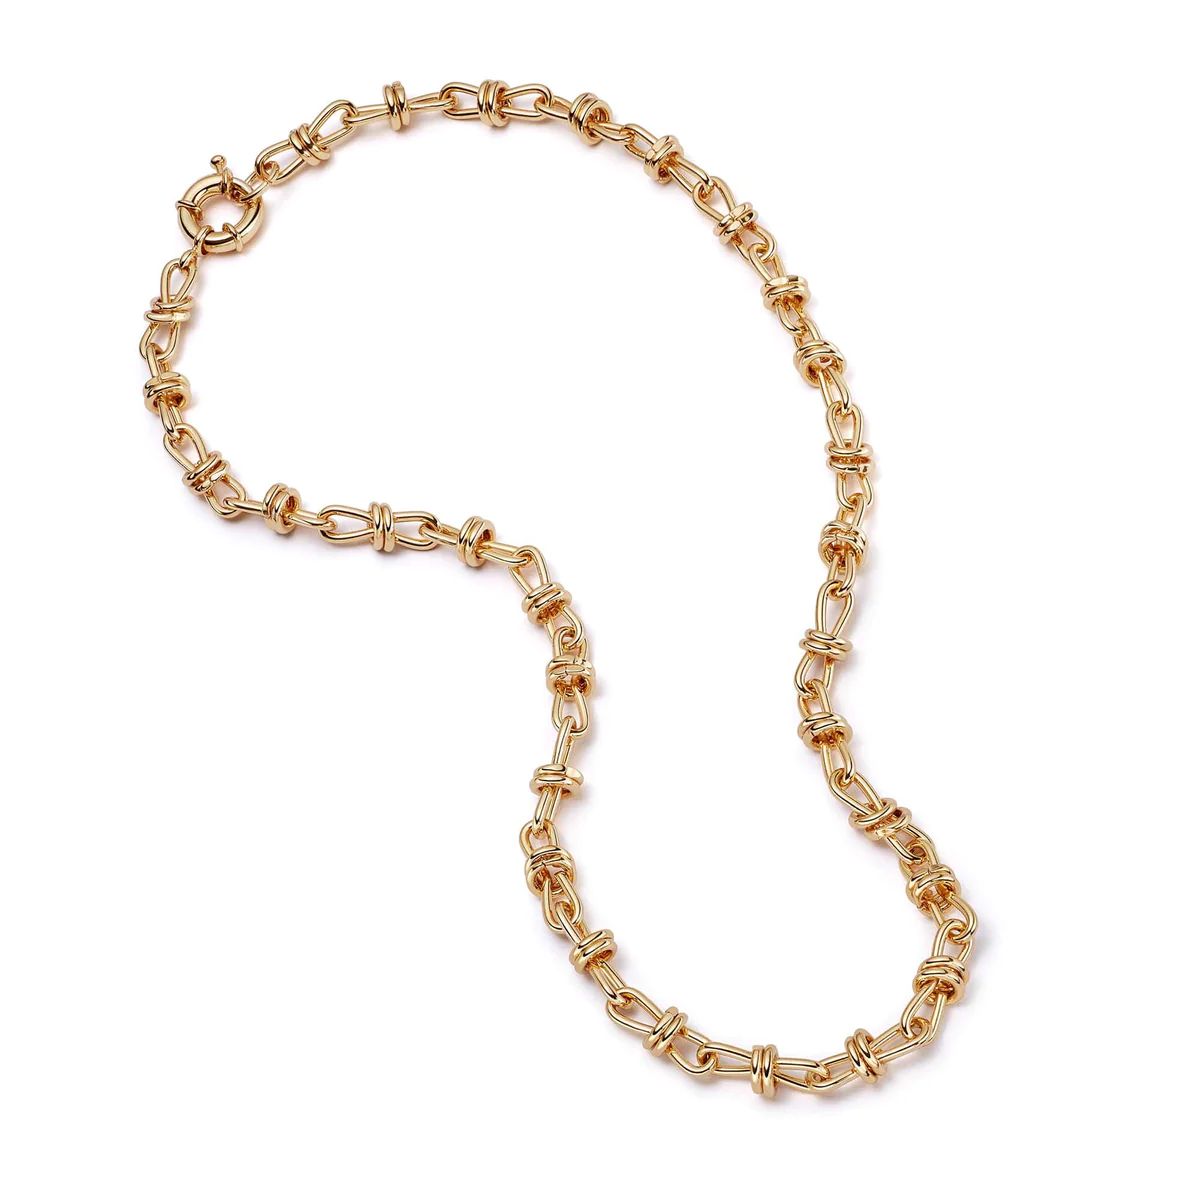 Polly Sayer Knot Chain Necklace 18ct Gold Plate | Daisy London Jewellery